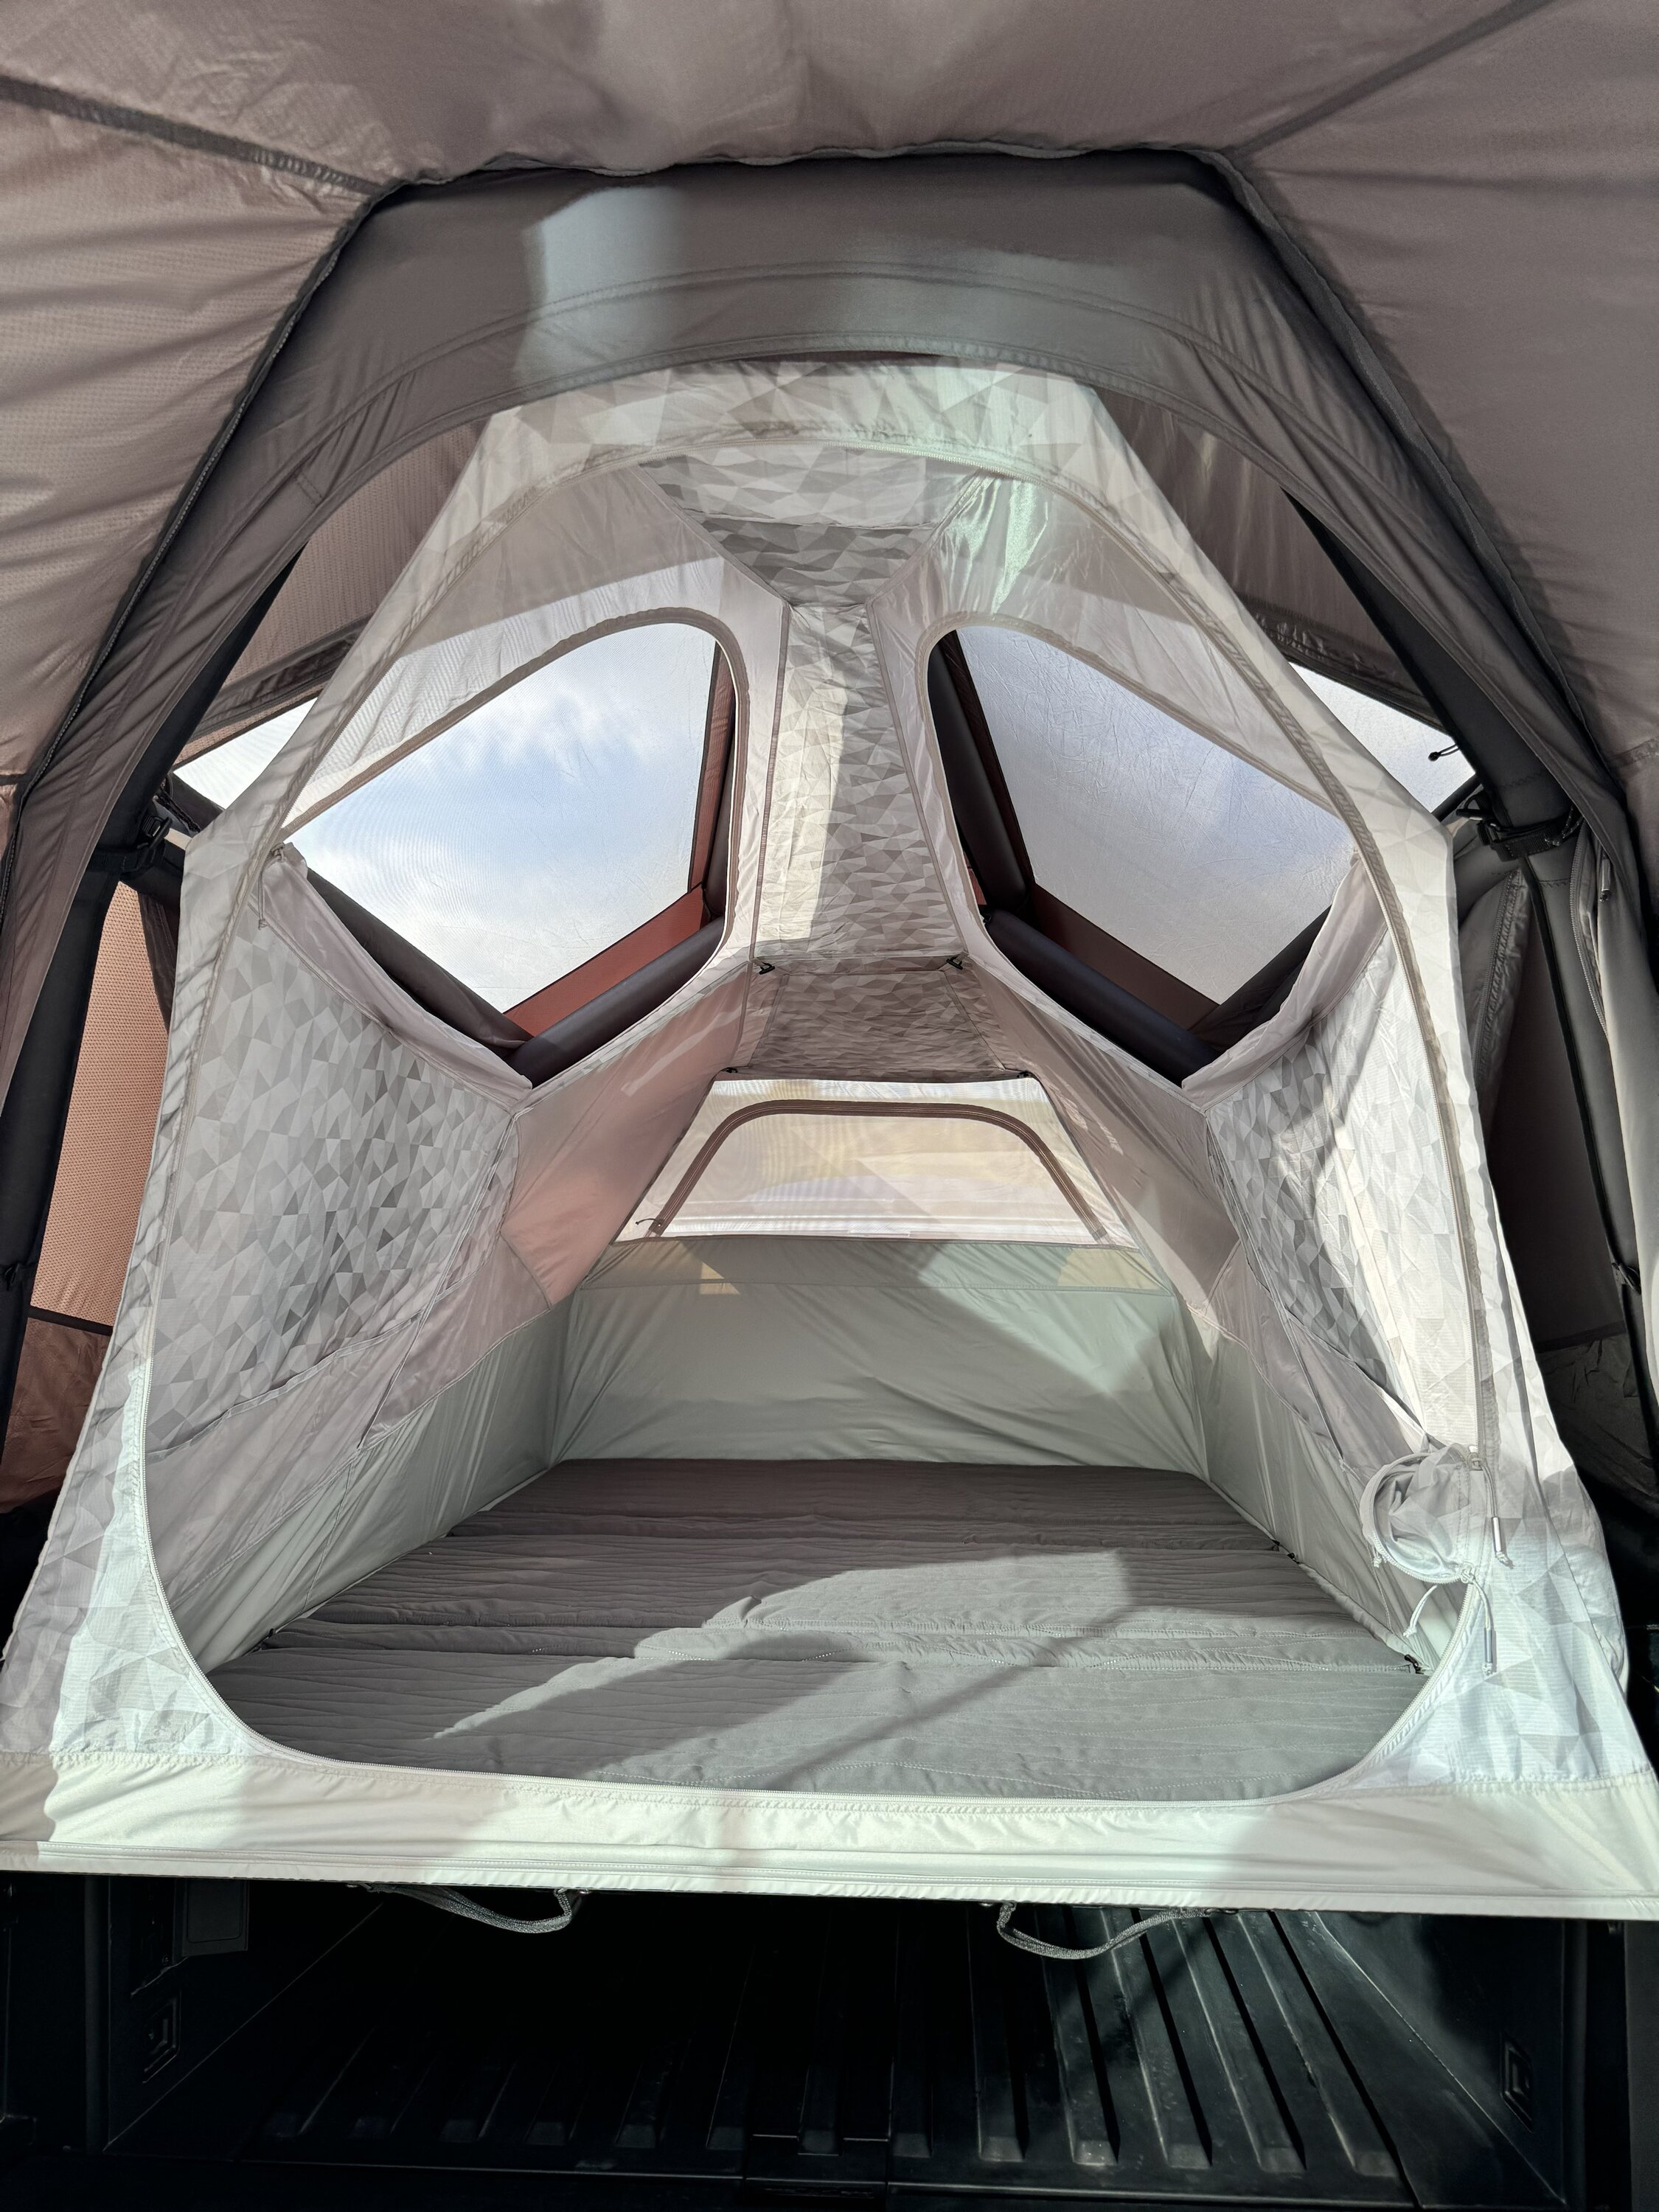 Tesla Cybertruck BaseCamp Bed Tent Cybertruck Official Accessory Priced at $2,975 BaseCamp bed tent Tesla Cybertruck 6